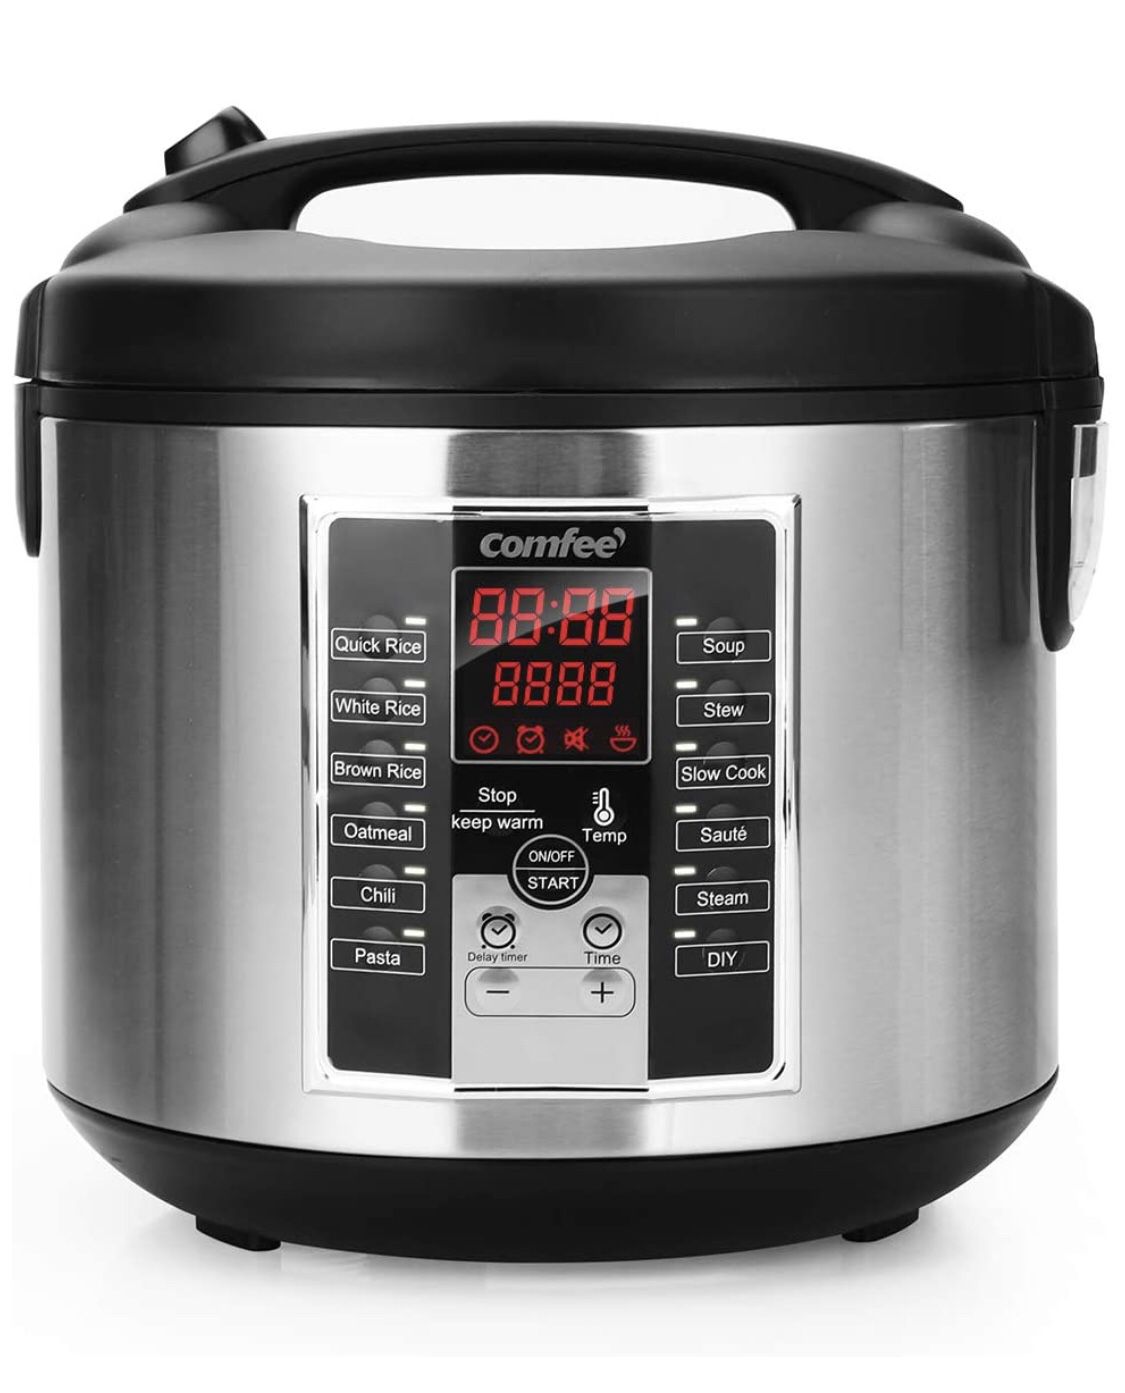 COMFEE' Rice Cooker, Slow Cooker, Steamer, Stewpot, Sauté All in One (12 Digital Cooking Programs) Multi Cooker (5.2Qt ) Large Capacity. 24 Hours Pre